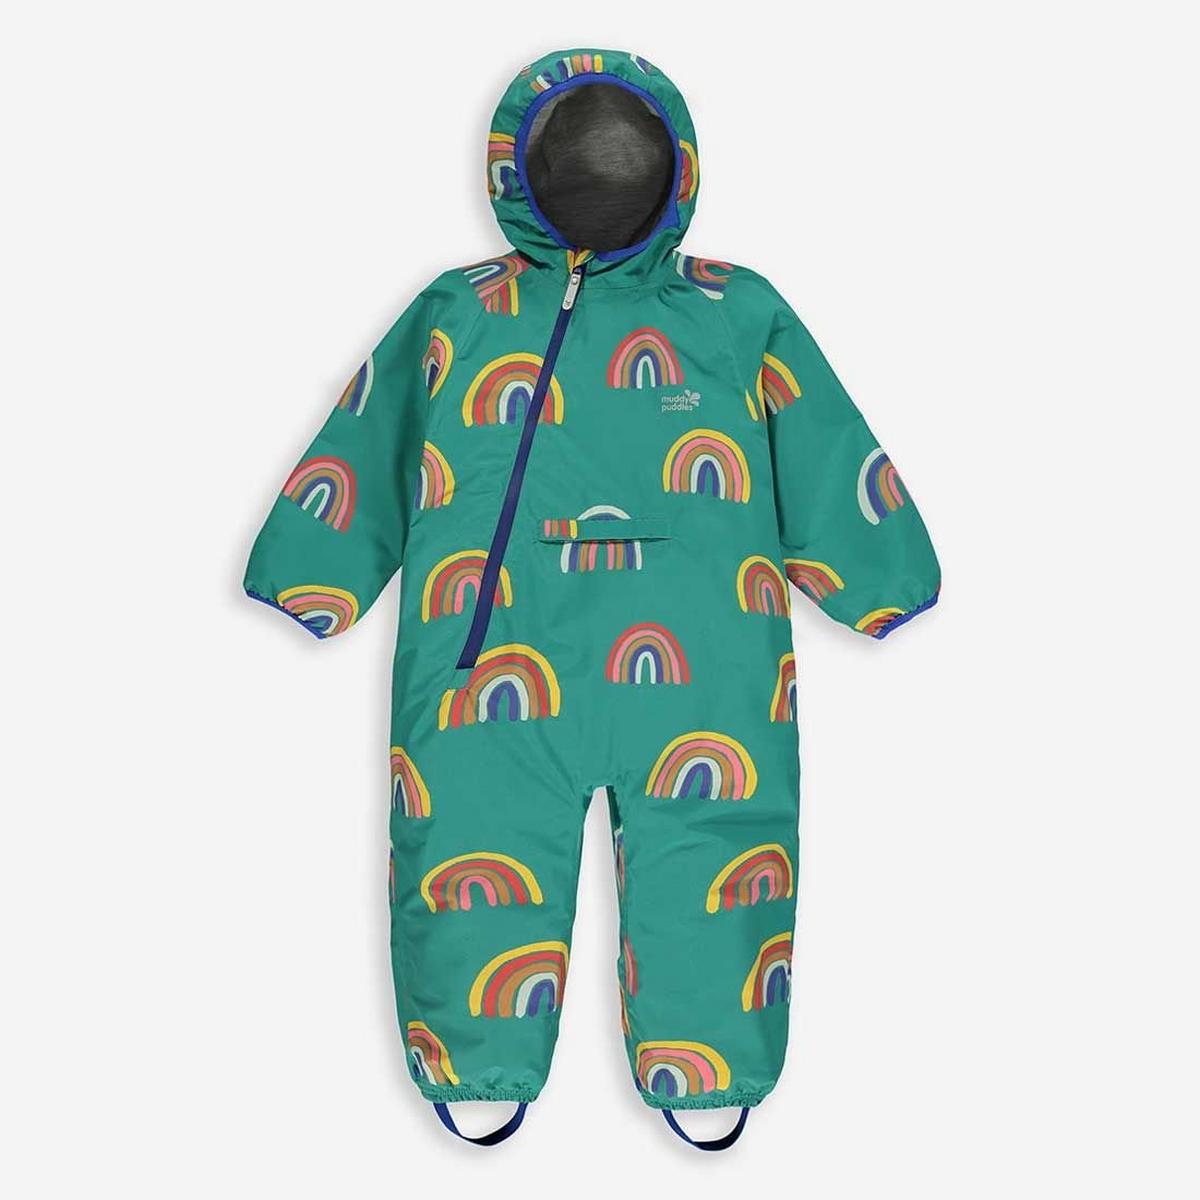 Muddy Puddles Kids EcoLight Puddle Suit - Green Rainbow